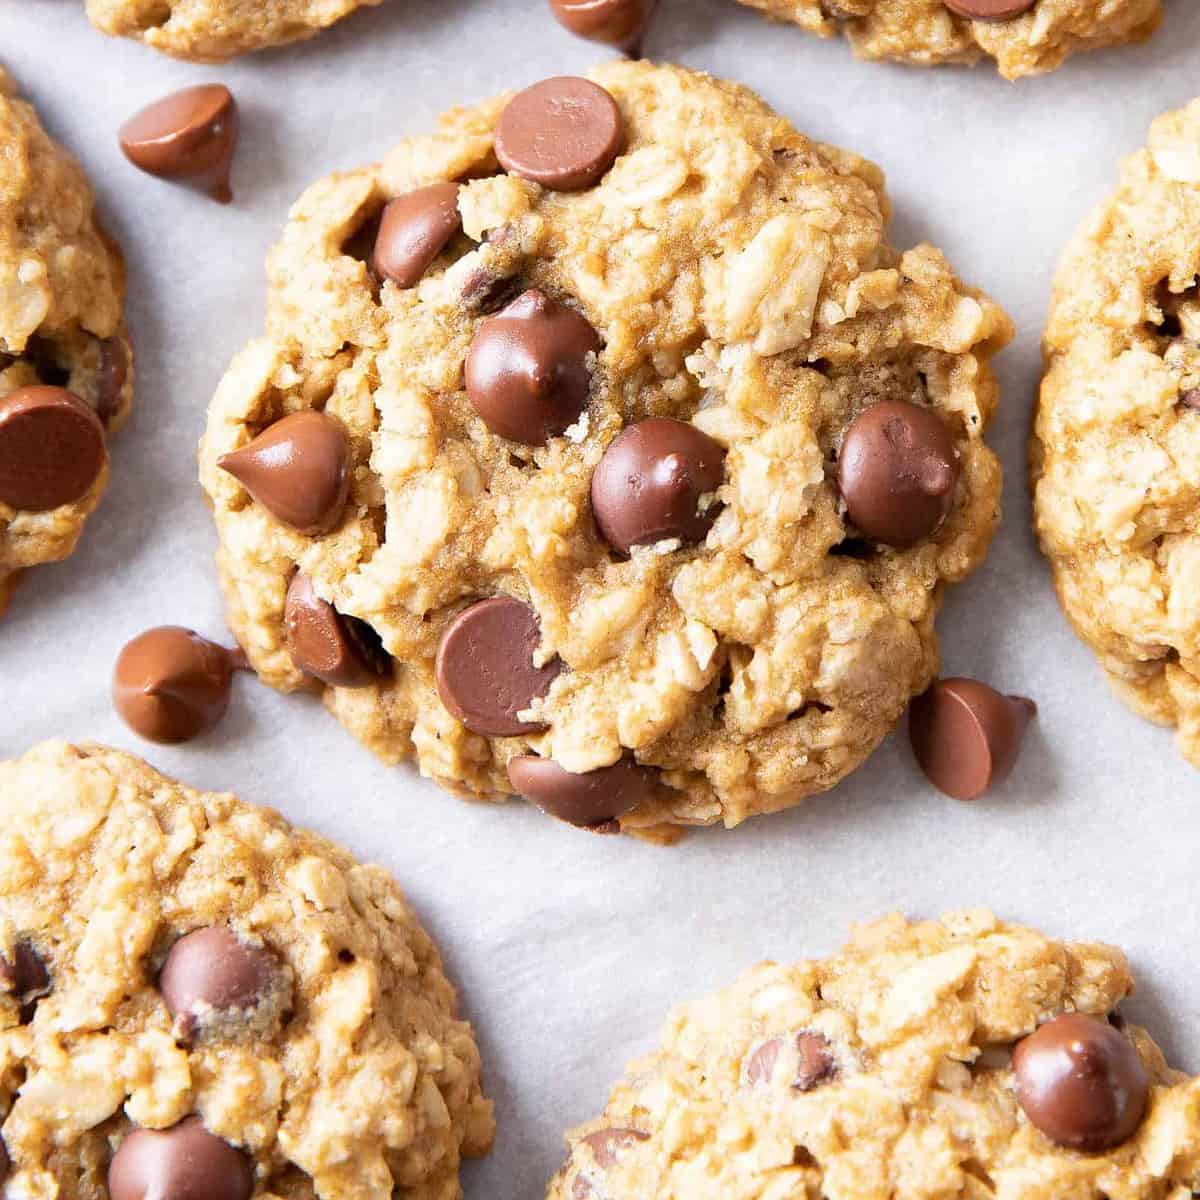  Enjoy a warm, chewy cookie without any gluten or refined sugar.